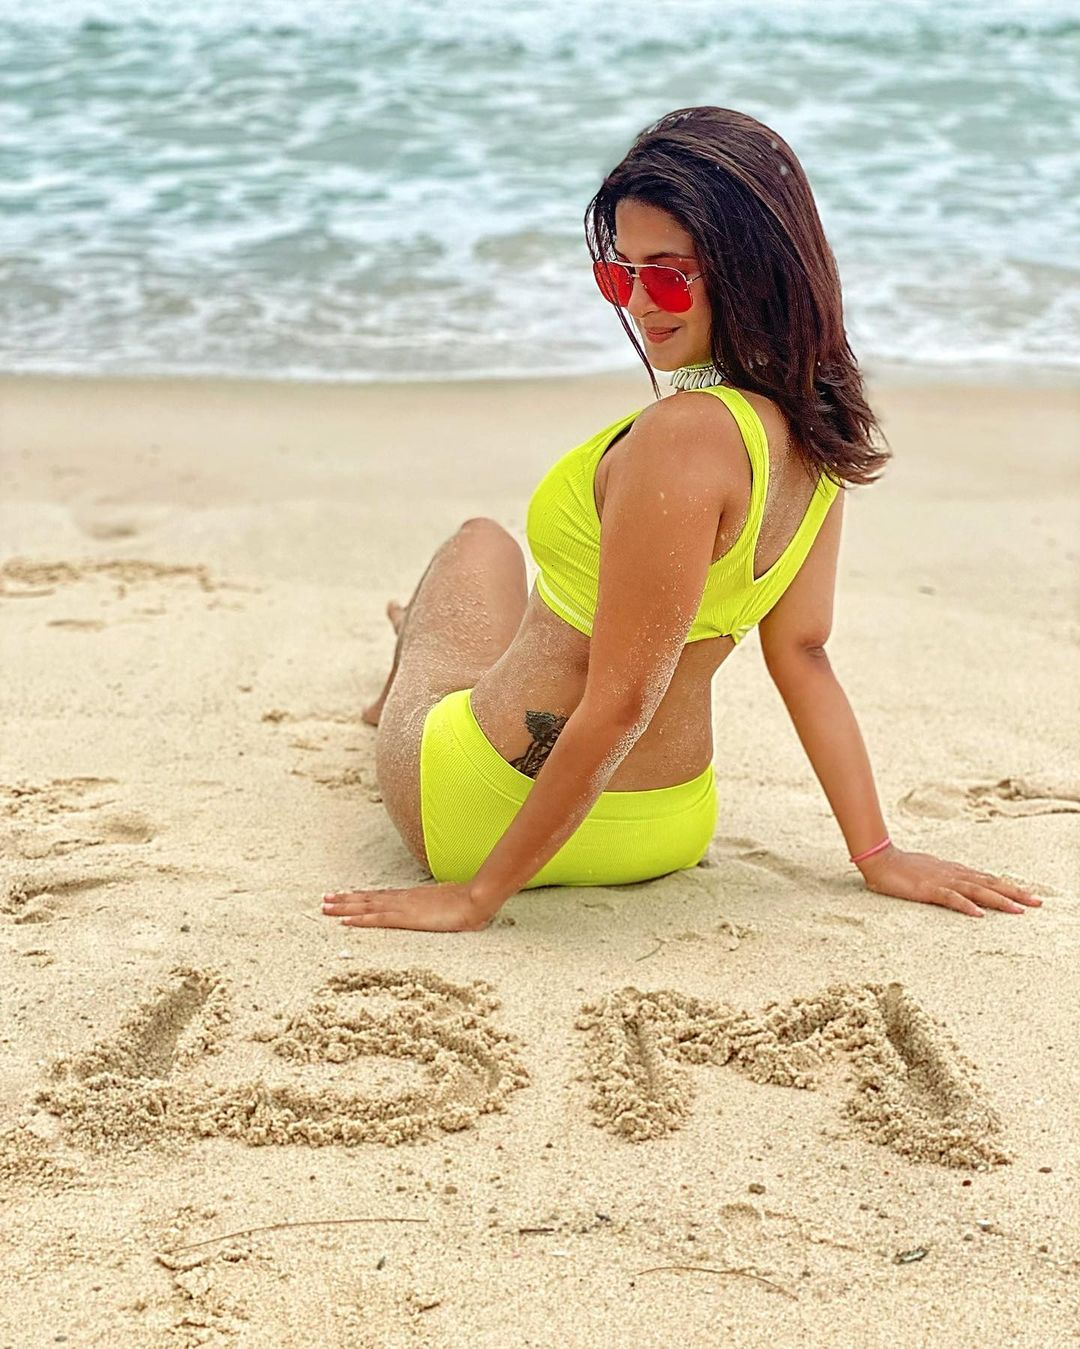 Jennifer Winget Fuck - Jennifer Winget In Bright Yellow Bikini Is A Sight For Sore Eyes, Check Out  The Diva's Head-turning Pictures